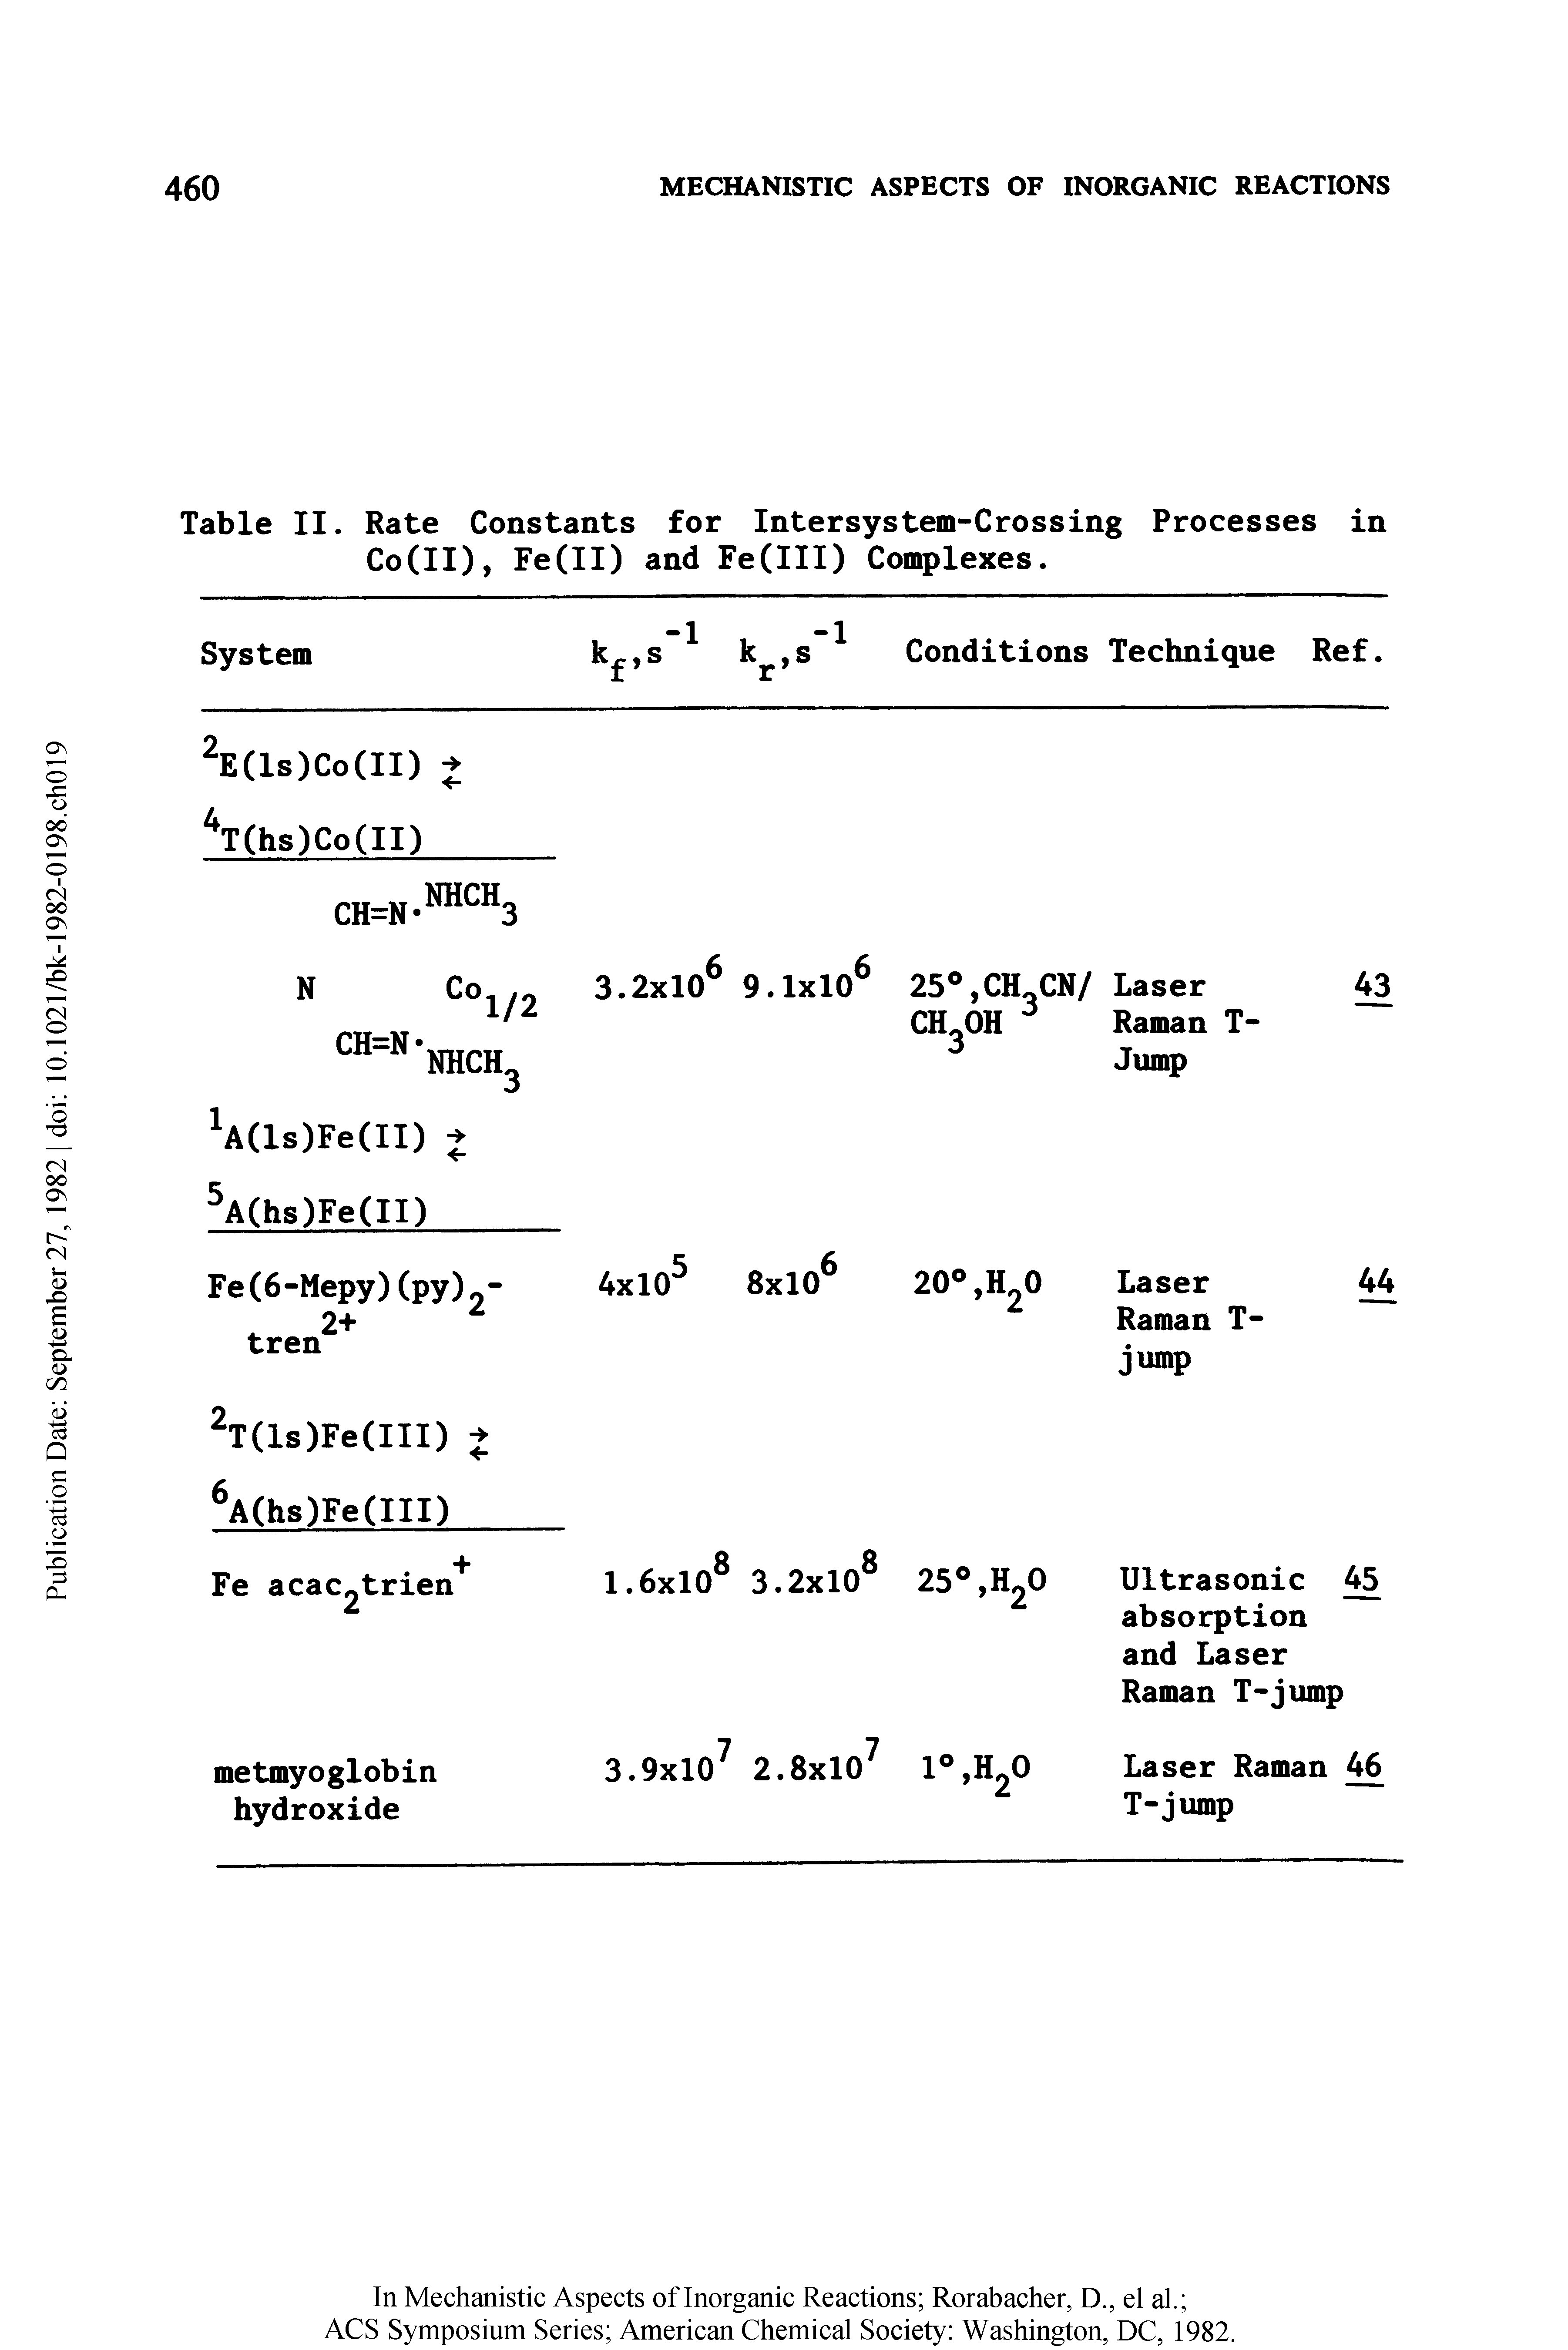 Table II. Rate Constants for Intersystem-Crossing Processes in Co(II), Fe(II) and Fe(III) Complexes.